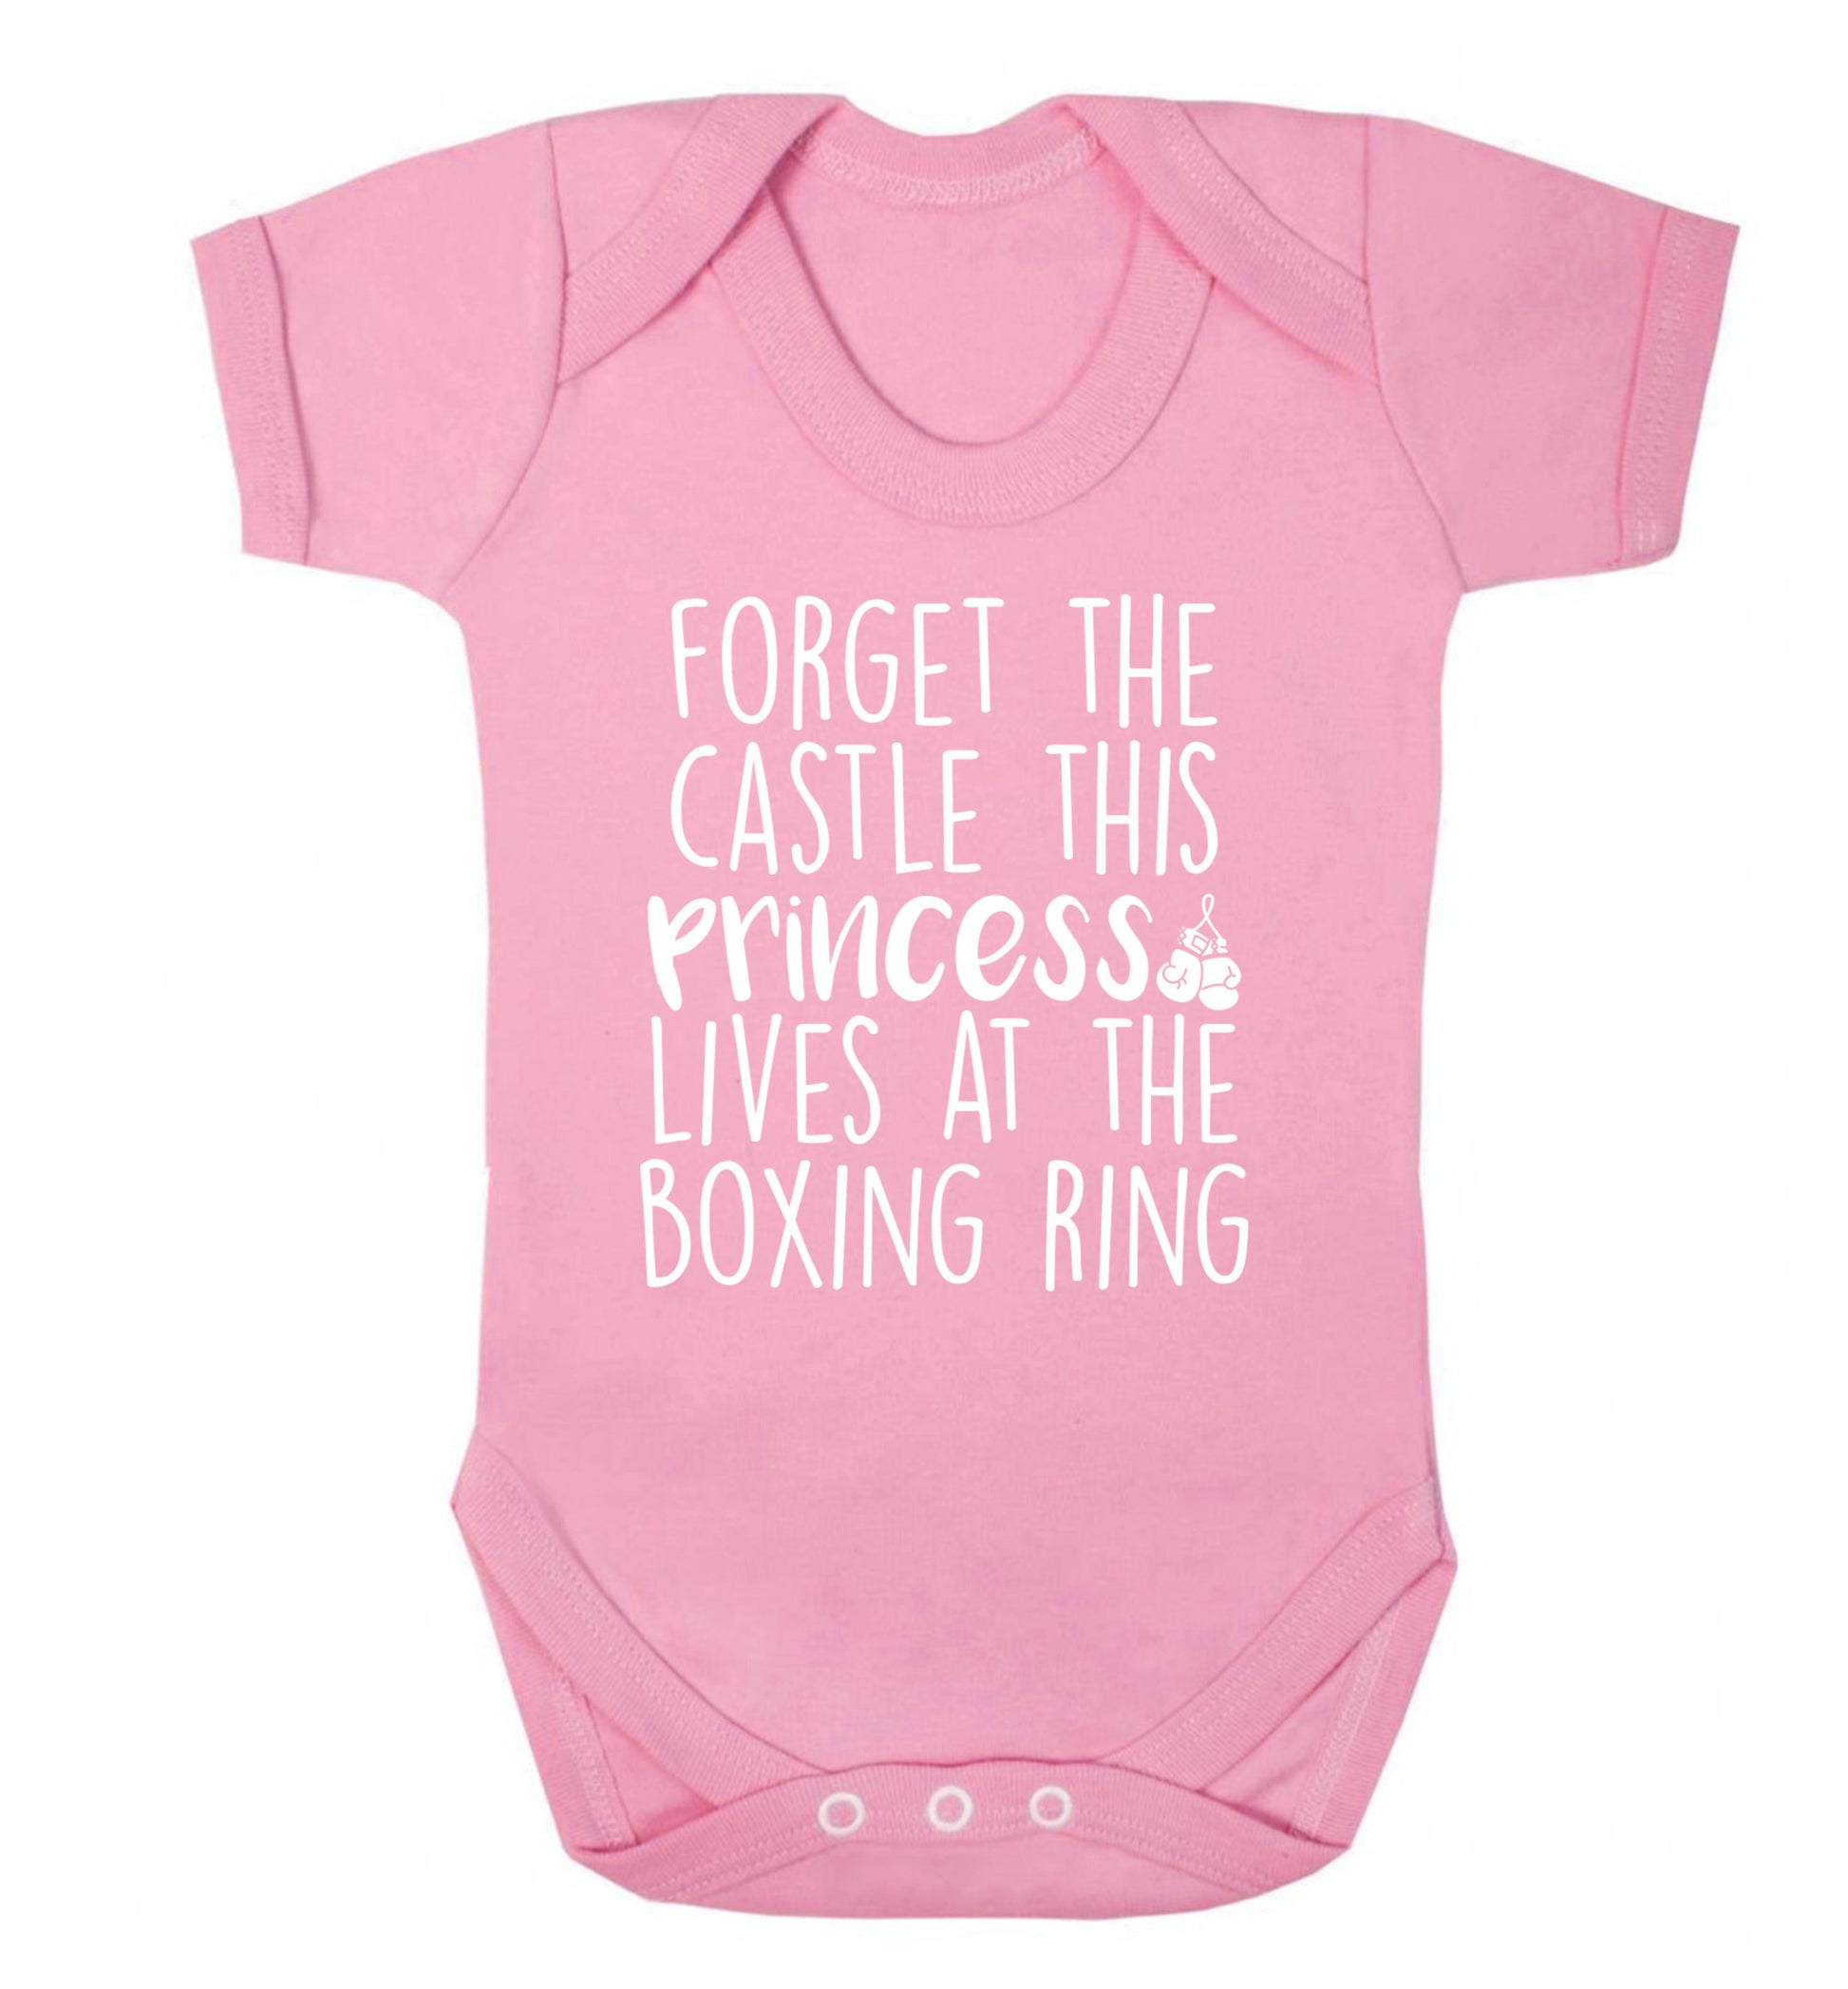 Forget the castle this princess lives at the boxing ring Baby Vest pale pink 18-24 months